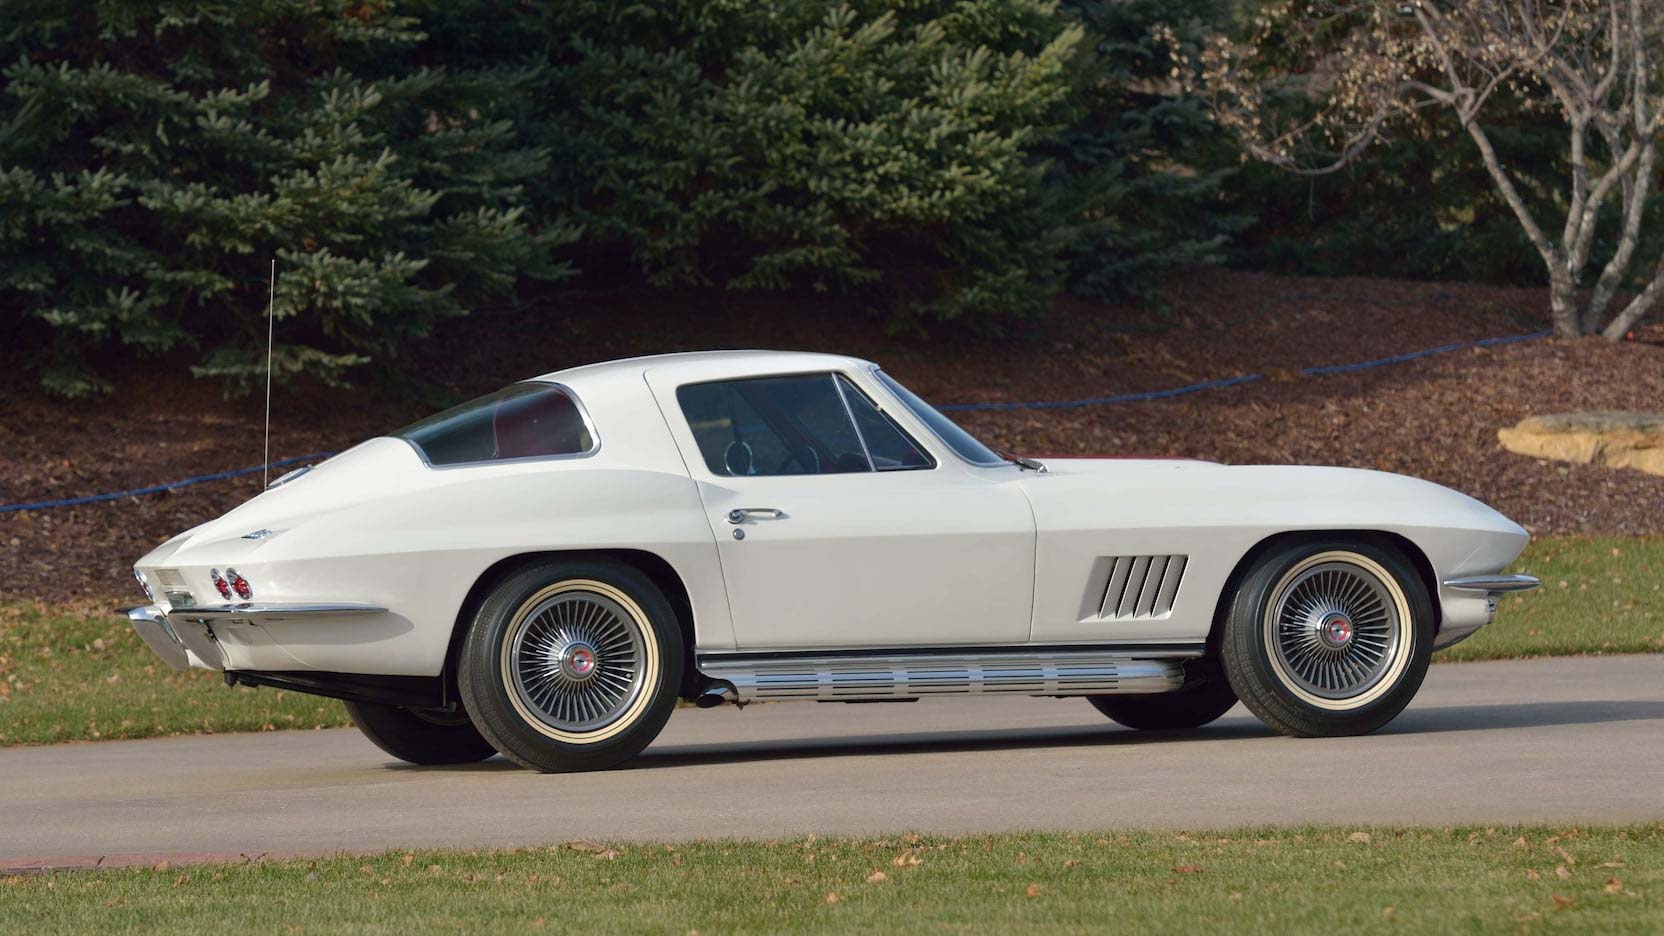 Up for auction, this 1967 Corvette Sting Ray has only 2,996 miles on it.